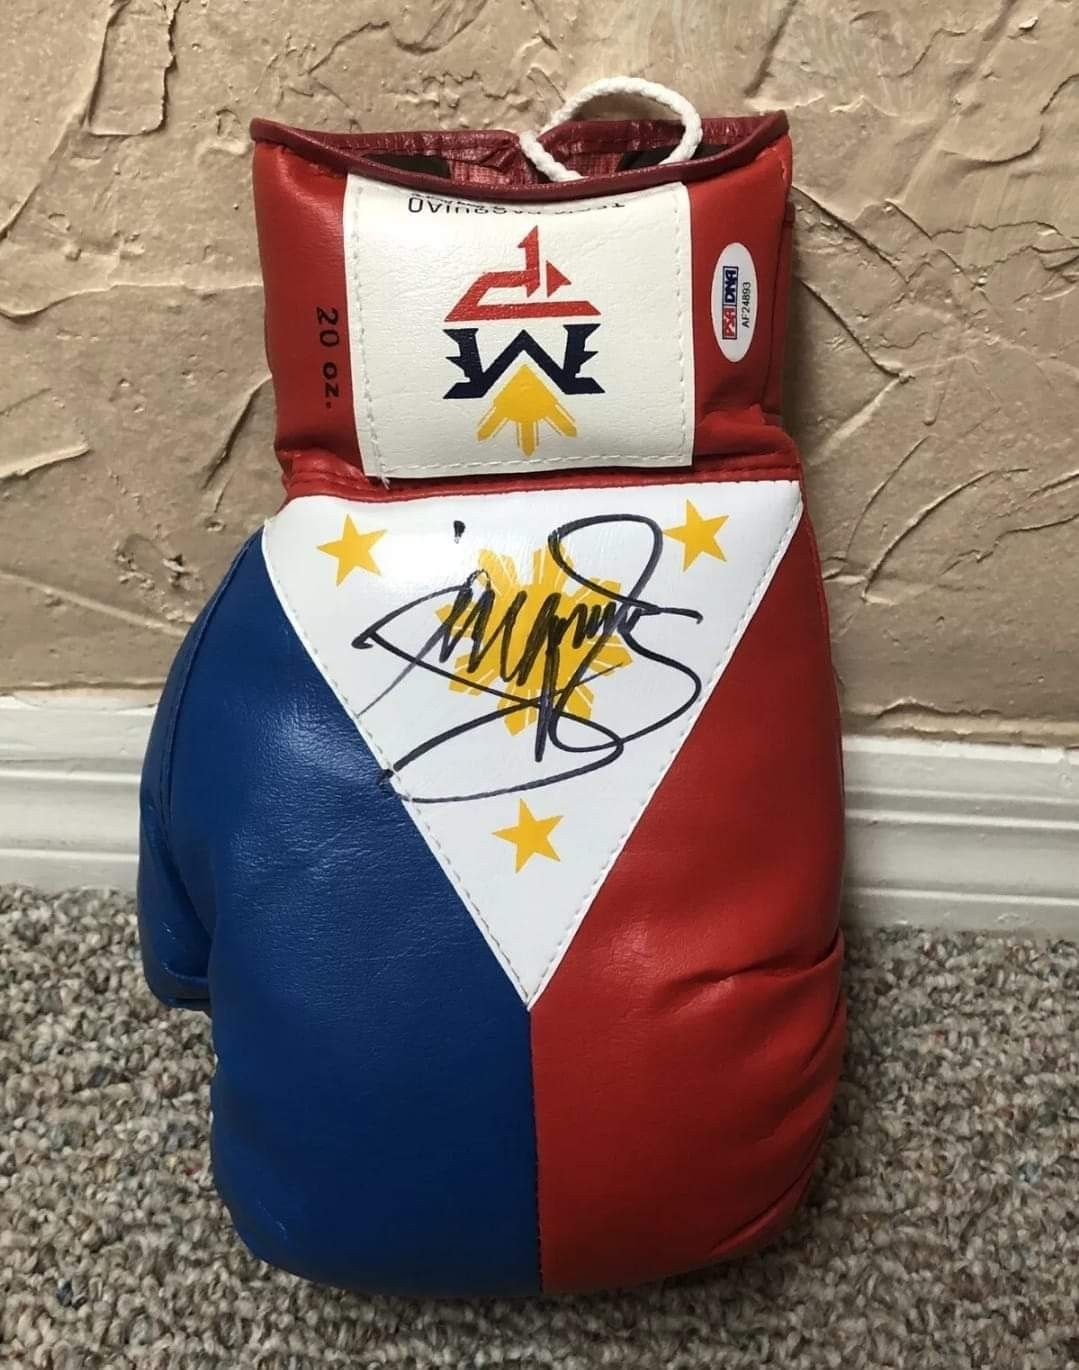 Manny "Pacman " Pacquiao Boxing Glove